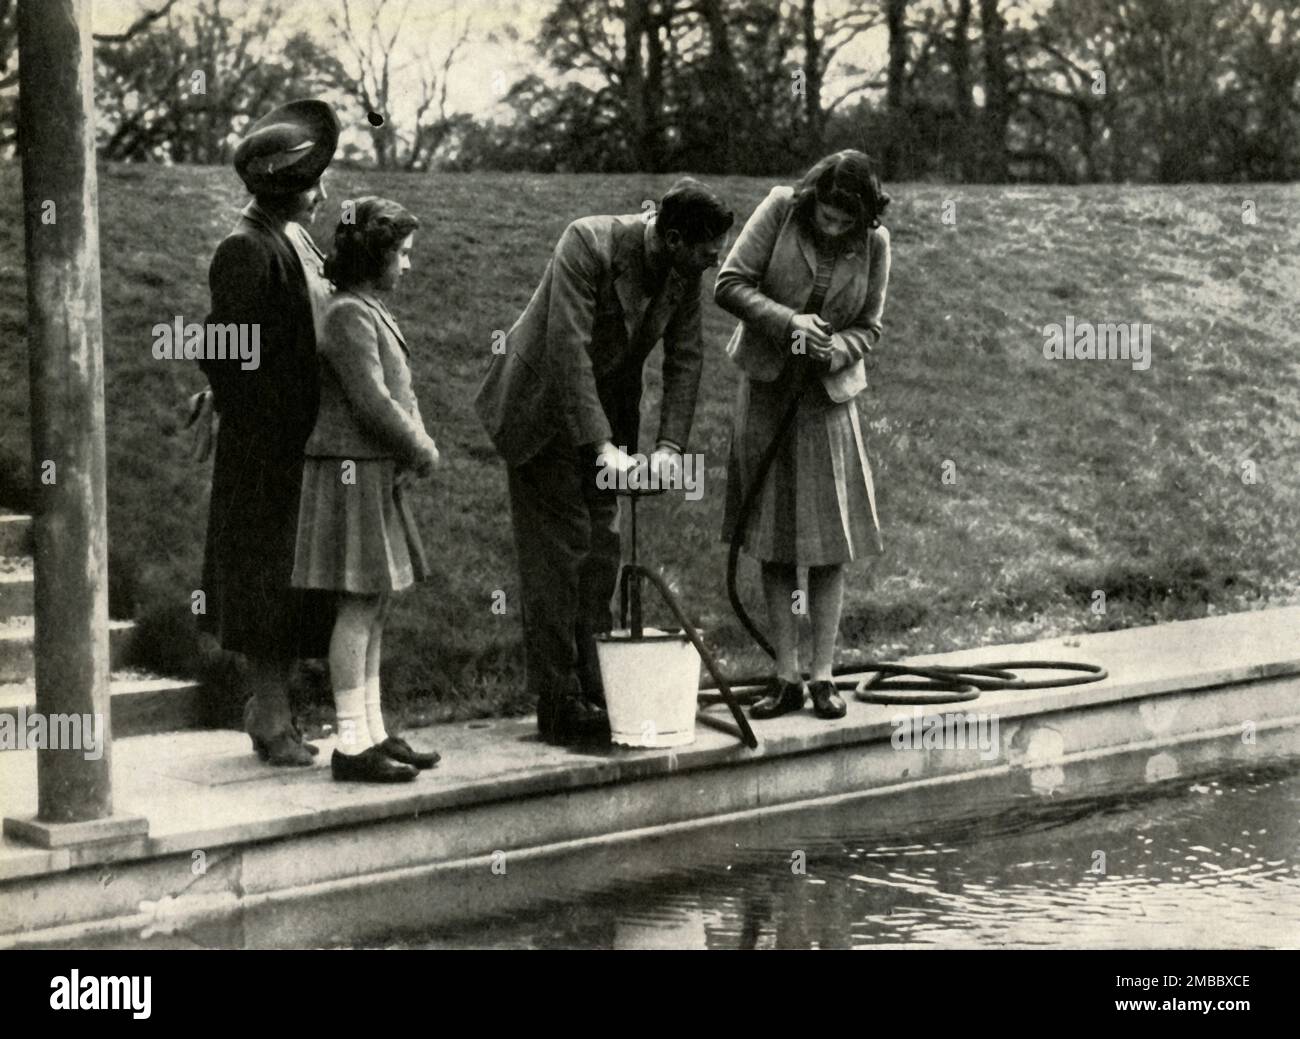 'Wartime at Windsor', 1941, (1947). King George VI and Queen Elizabeth with daughters Princess Elizabeth (future Queen Elizabeth II) and Princess Margaret Rose. In 1940 the princesses went to live at Windsor for the duration of the Second World War. Here we see the King and Princess Elizabeth at stirrup pump practice. From &quot;Princess Elizabeth: The Illustrated Story of Twenty-one Years in the Life of the Heir Presumptive&quot;, by Dermot Morrah. [Odhams Press Limited, London, 1947] Stock Photo